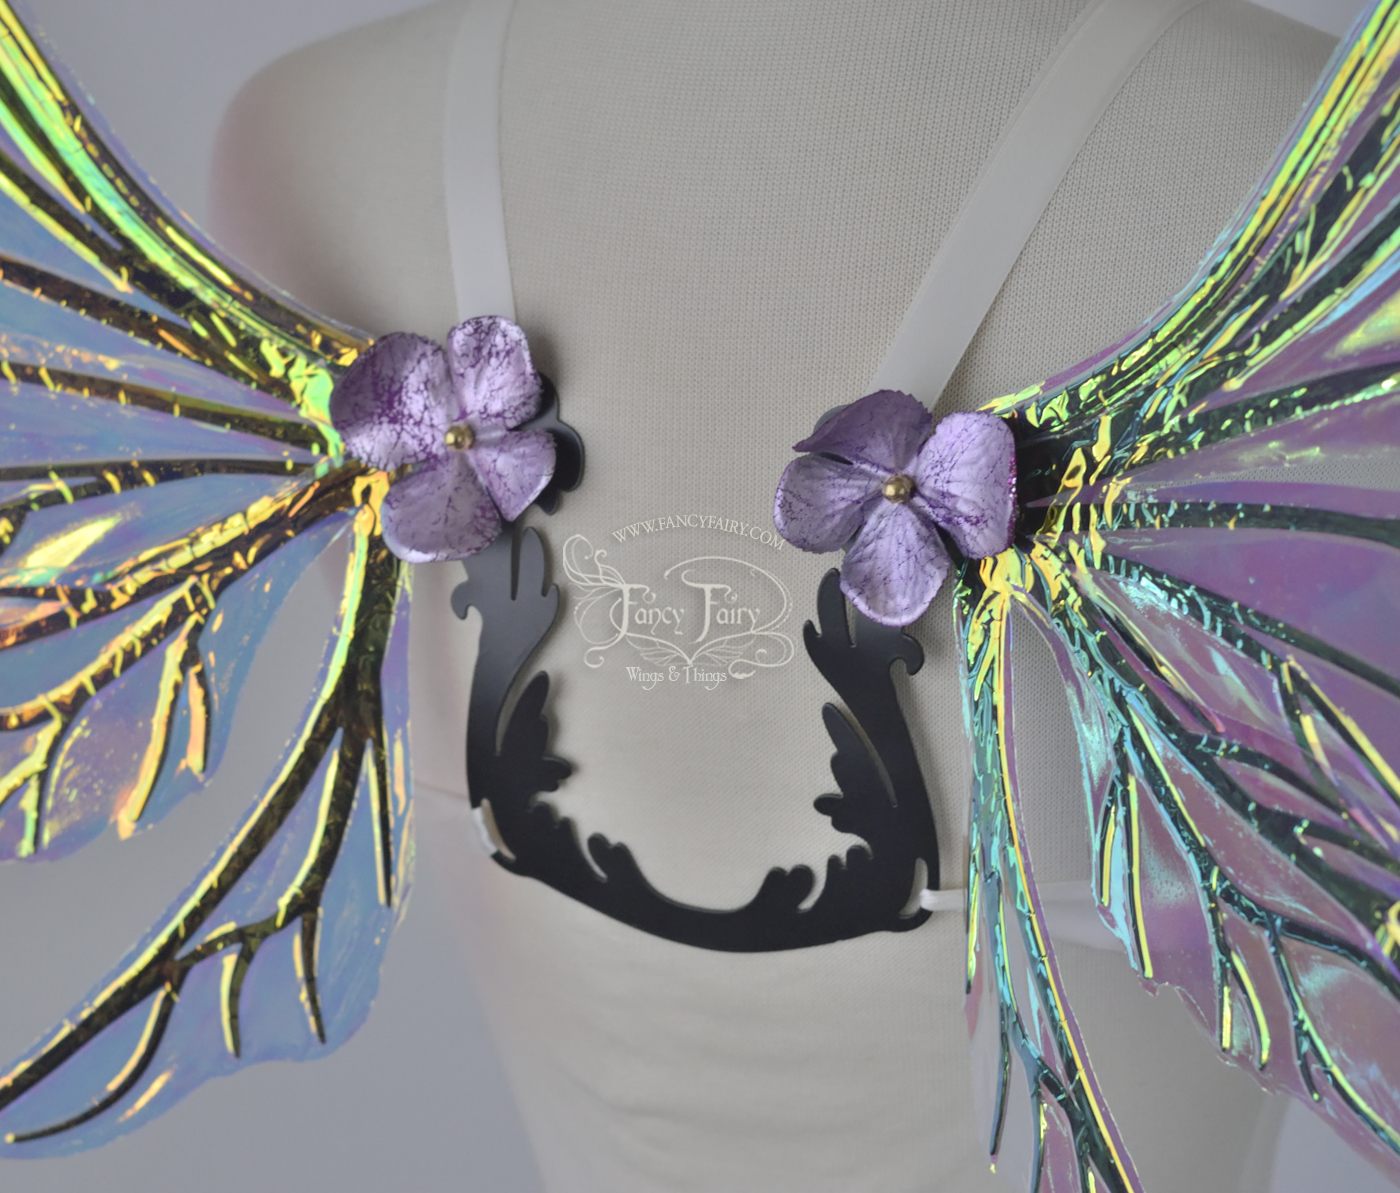 Fayette Convertible Iridescent "Pix" Painted Fairy Wings in 'Cosmic Berry', Ready to Ship